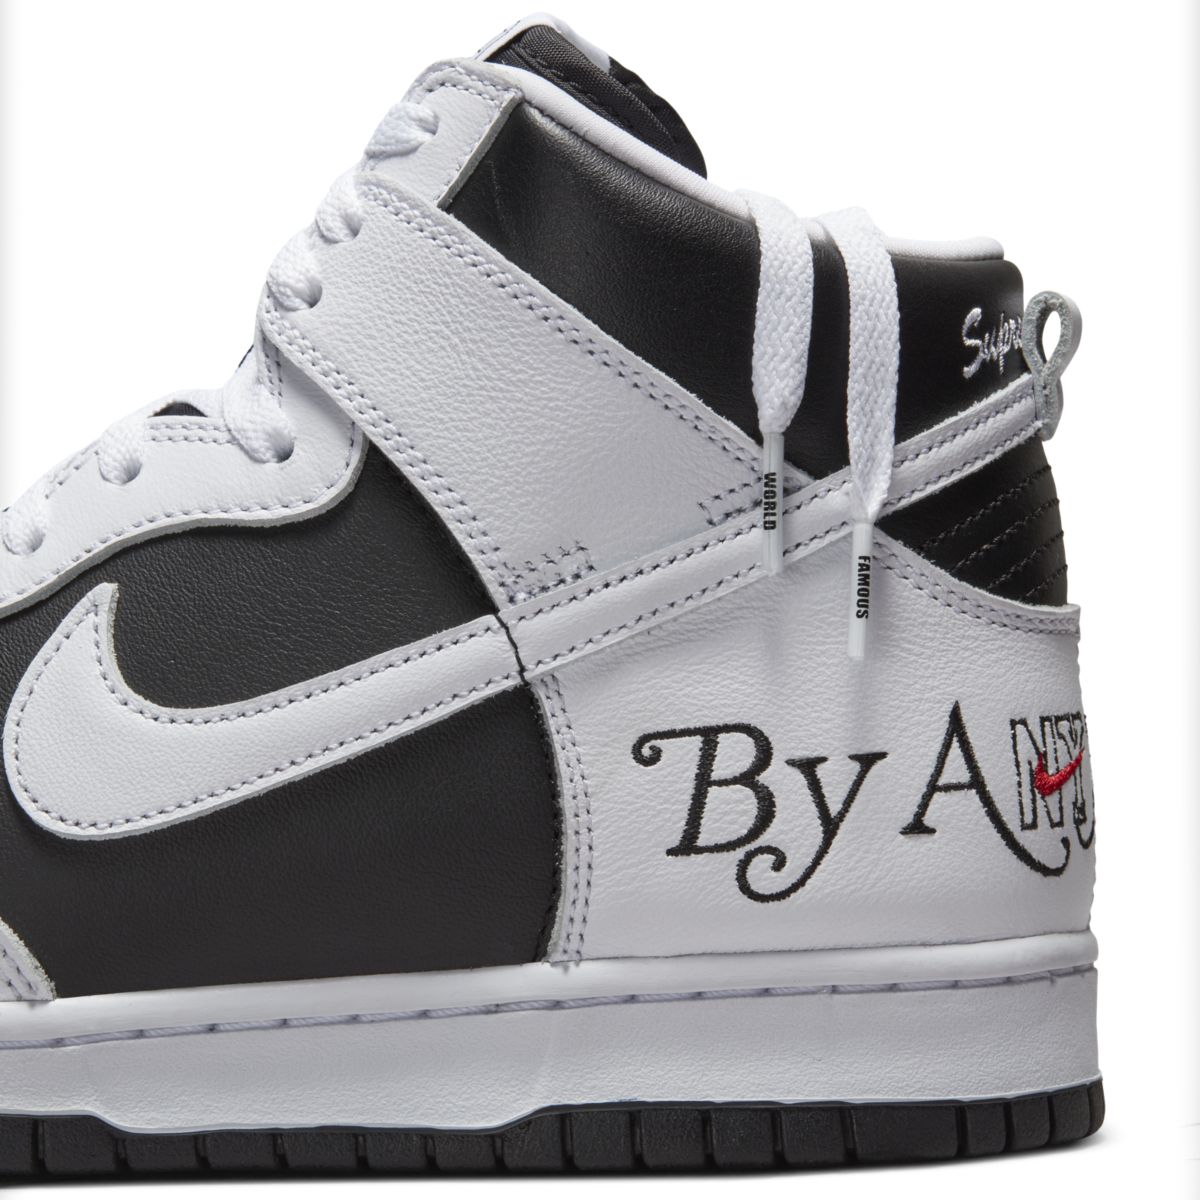 Supreme x Nike SB Dunk High By Any Means Black White DN3741-002 10